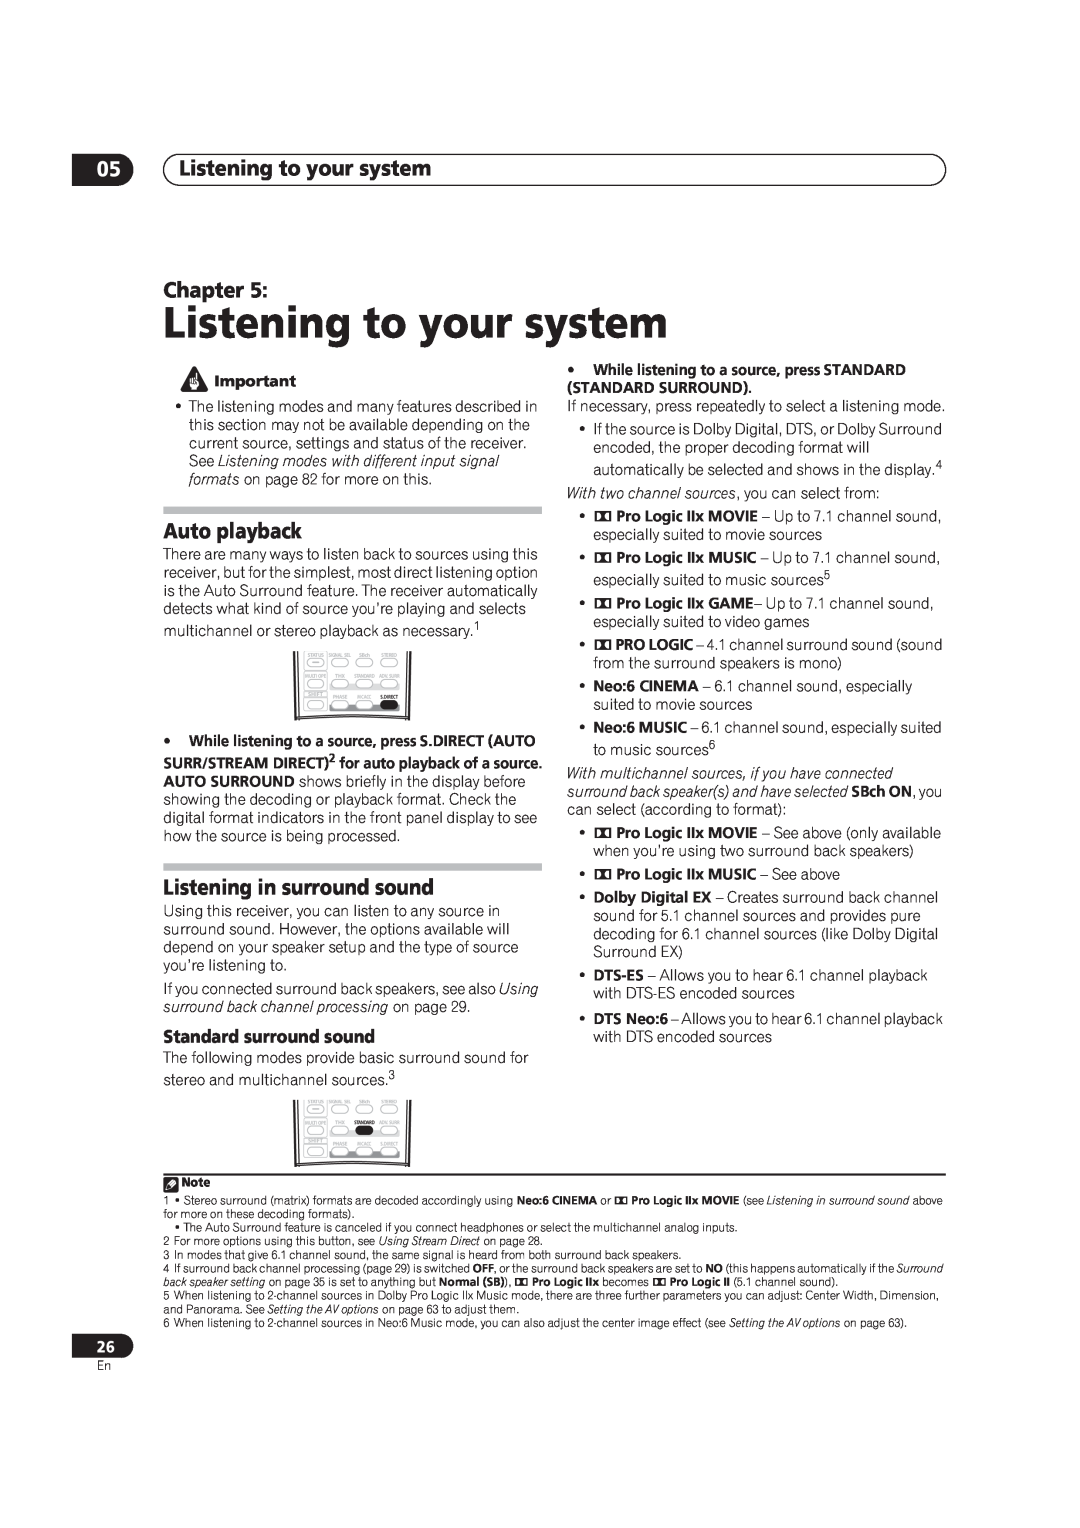 Pioneer VSX-AX4AVi-S, VSX-AX2AV-S manual Listening to your system Chapter, Auto playback, Listening in surround sound 